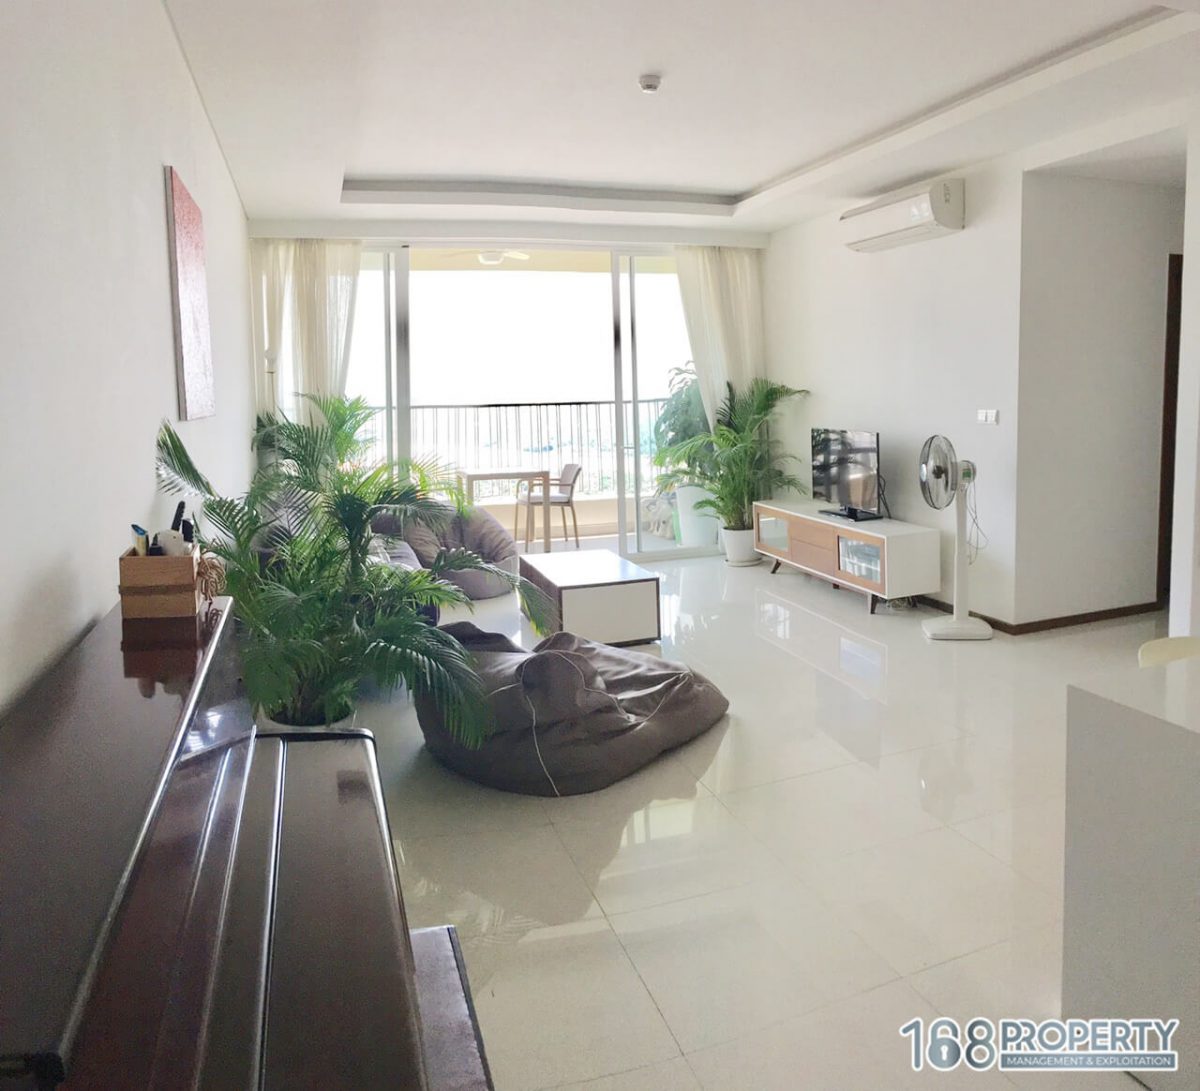 02brs-apartment-for-rent-in-thao-dien-pearl